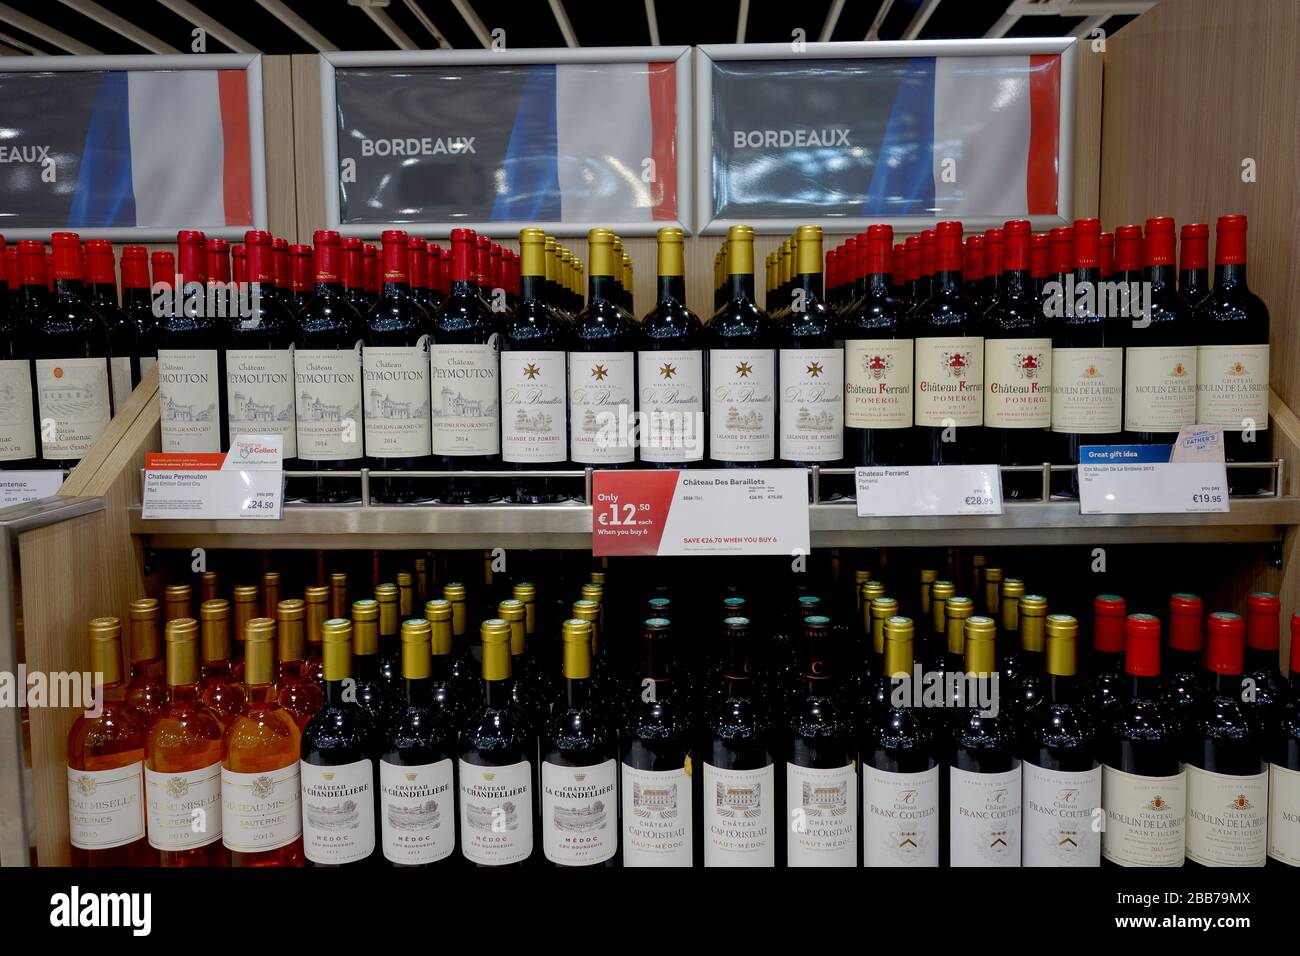 French Bordeux wine offers in supermarket Stock Photo